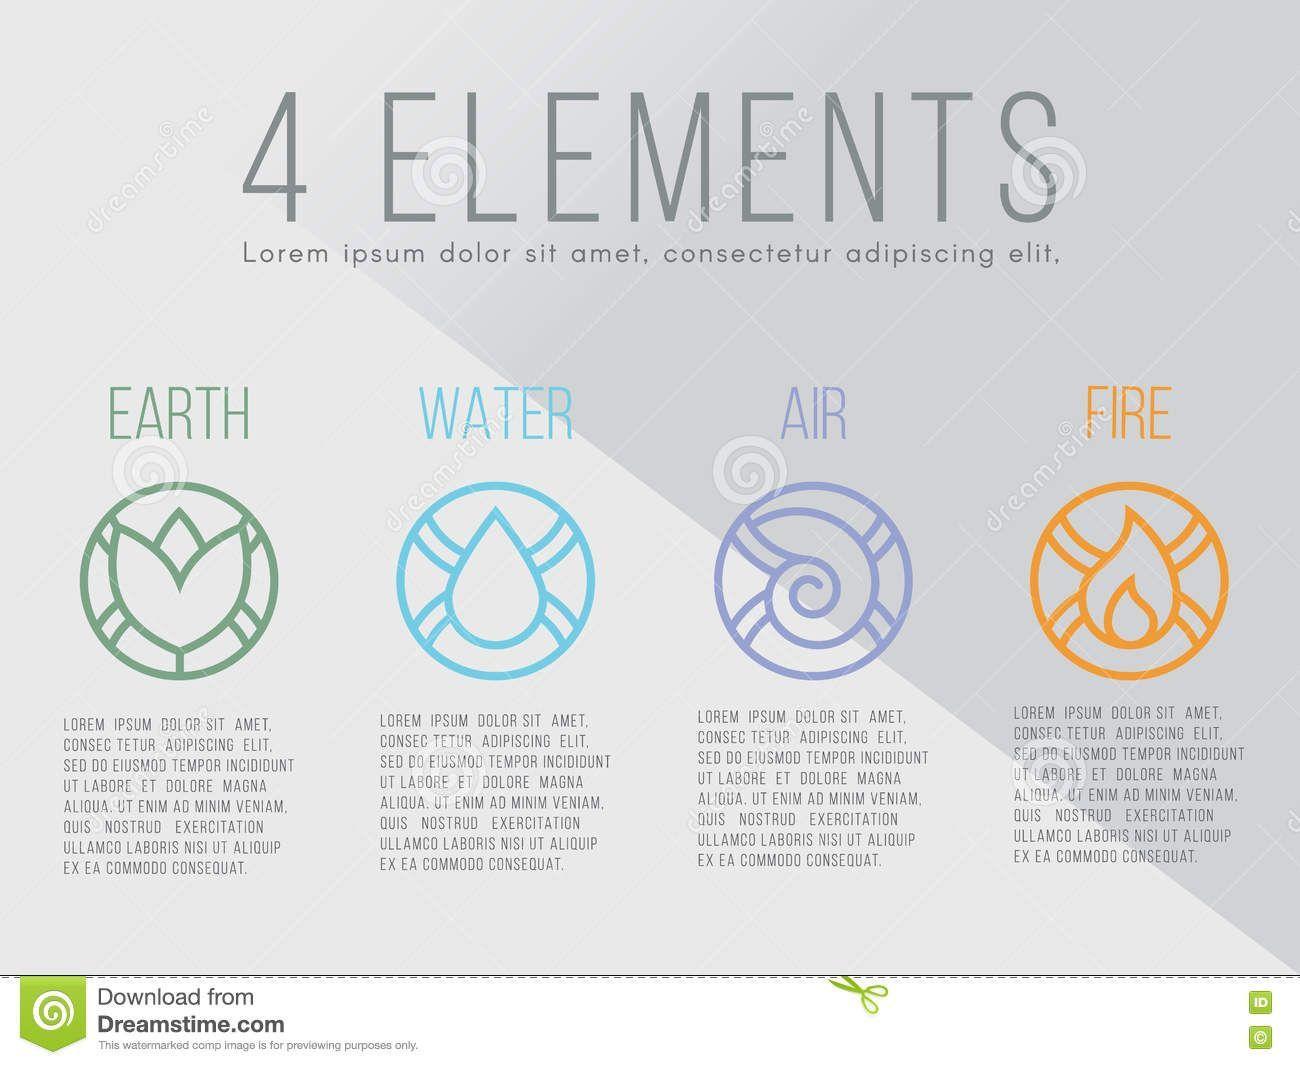 Air Element Logo - Nature 4 elements circle logo sign. Water, Fire, Earth, Air